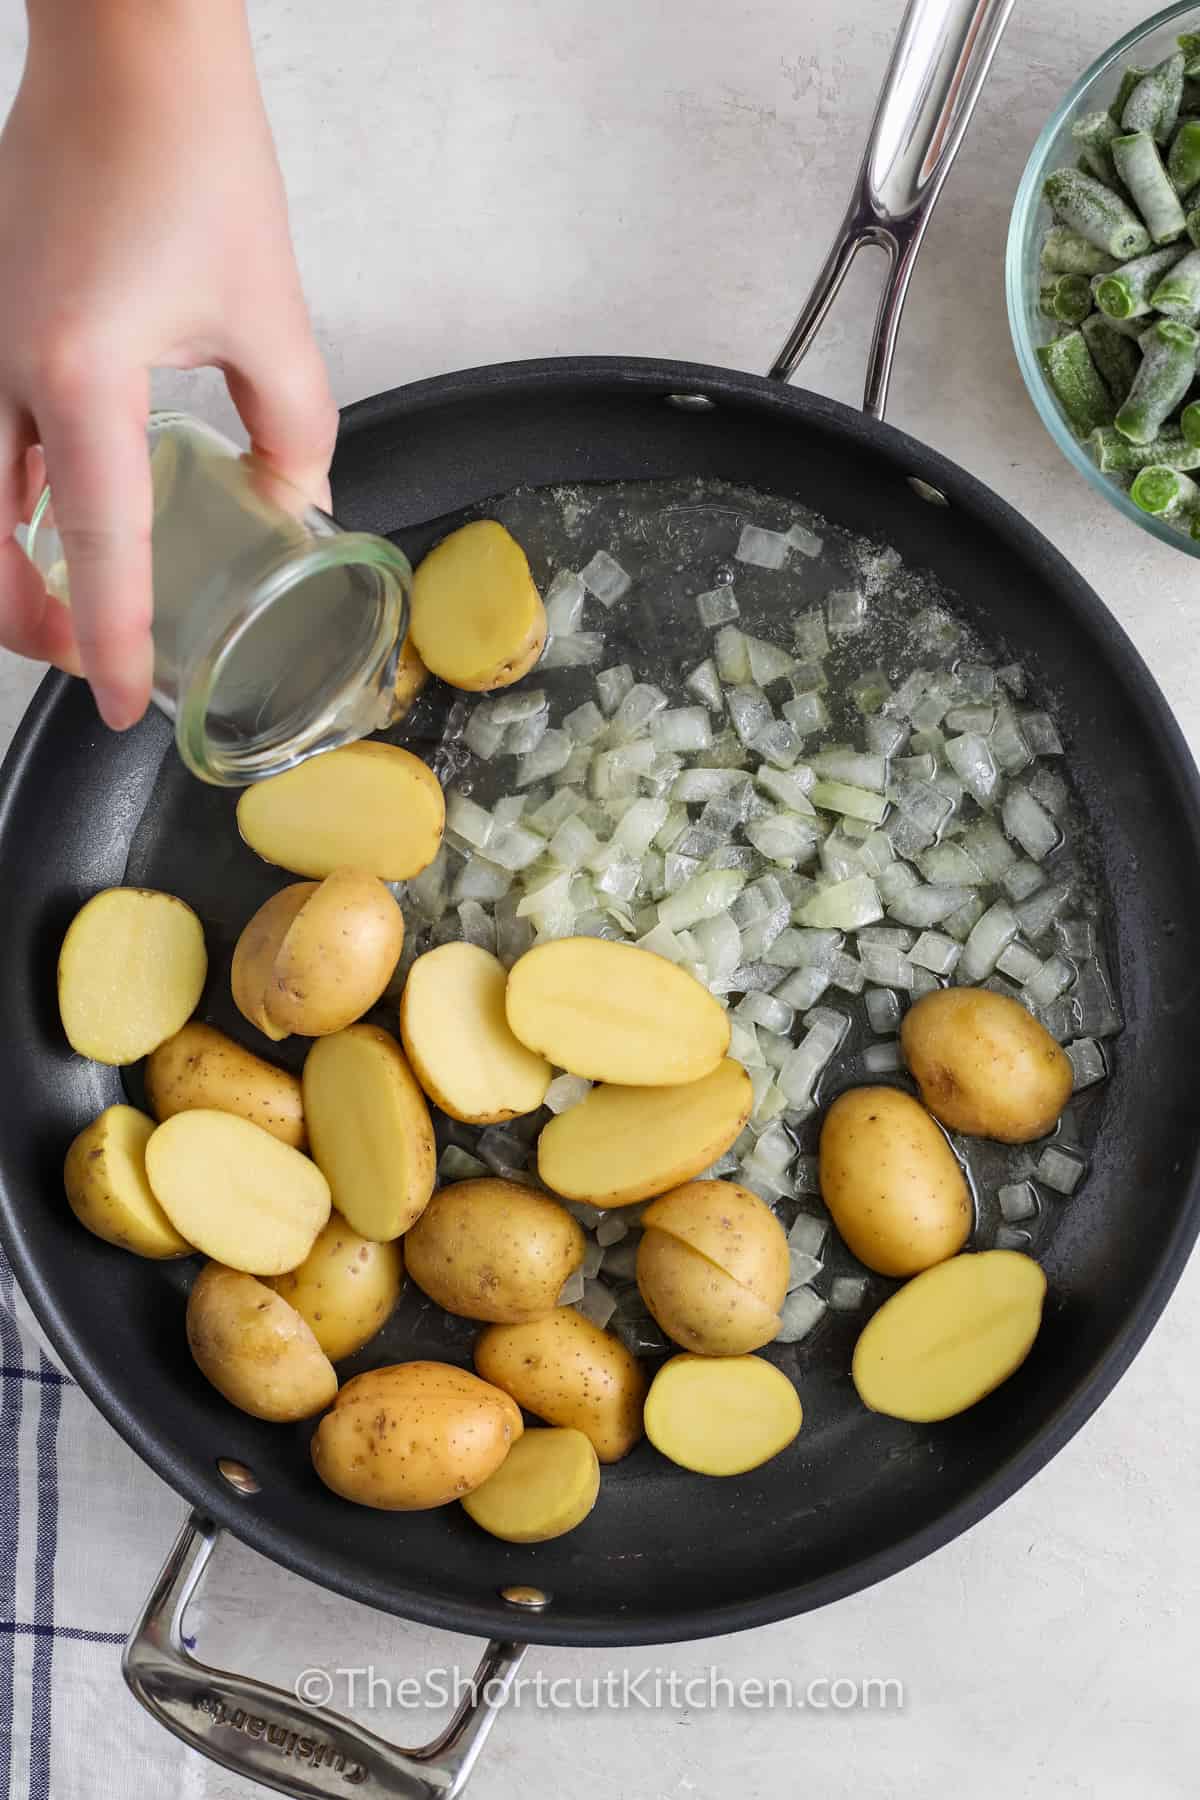 adding broth to potatoes and onion to make Green Beans and Potatoes